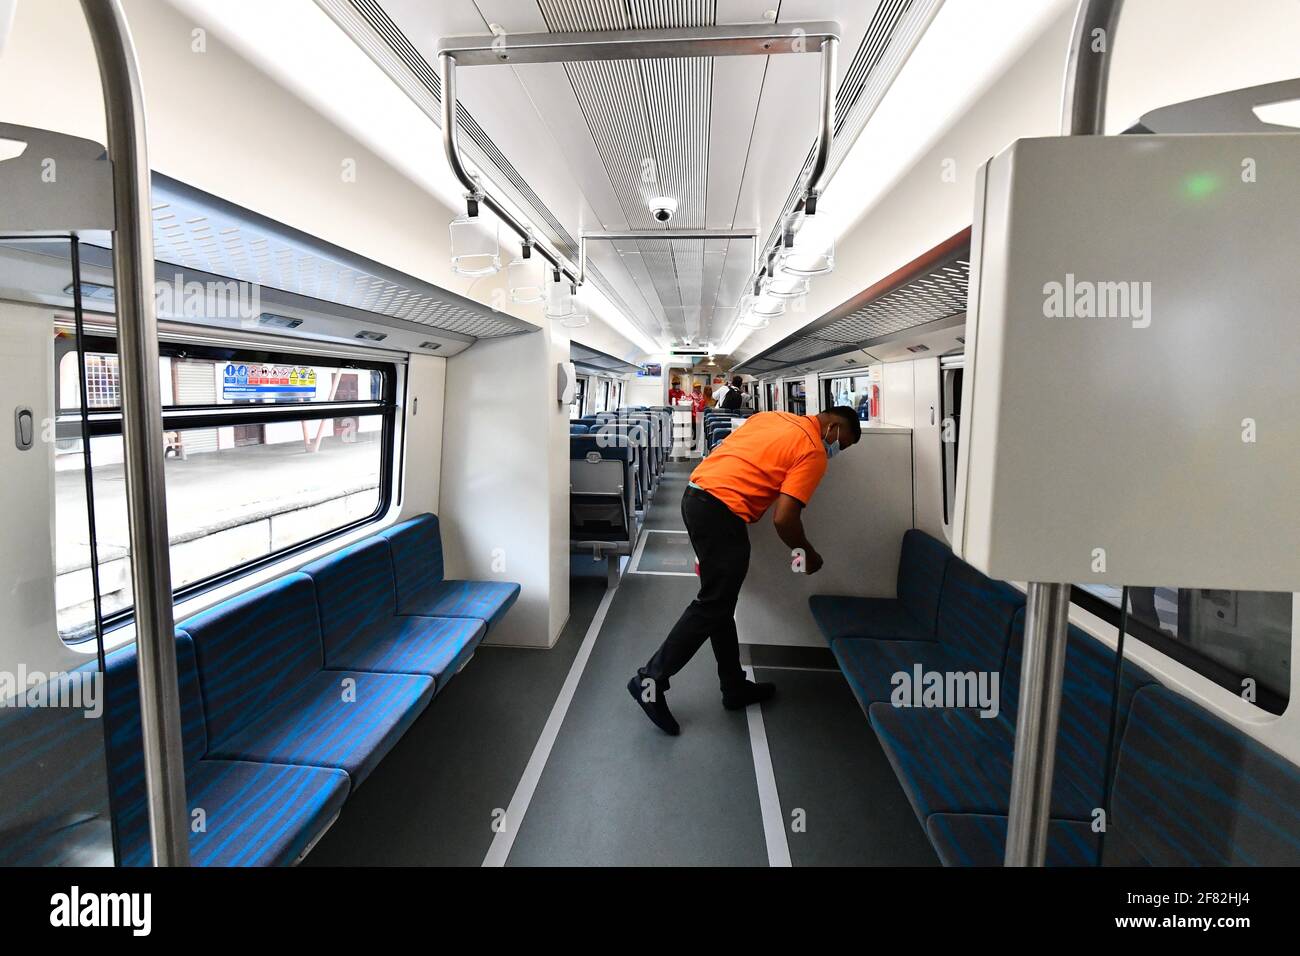 Kota Bharu, Malaysia's northern Kelantan state. 11th Apr, 2021. A worker cleans seats on the Diesel Multiple Unit train in Kota Bharu, the capital of Malaysia's northern Kelantan state, April 11, 2021. The Diesel Multiple Unit (DMU) trains manufactured by China Railway Rolling Stock Corporation (CRRC) Zhuzhou Electric Locomotive Co., Ltd were launched into operations on Sunday, which will boost connectivity and facilitate travel in Malaysia's eastern coast area. Credit: Zhu Wei/Xinhua/Alamy Live News Stock Photo